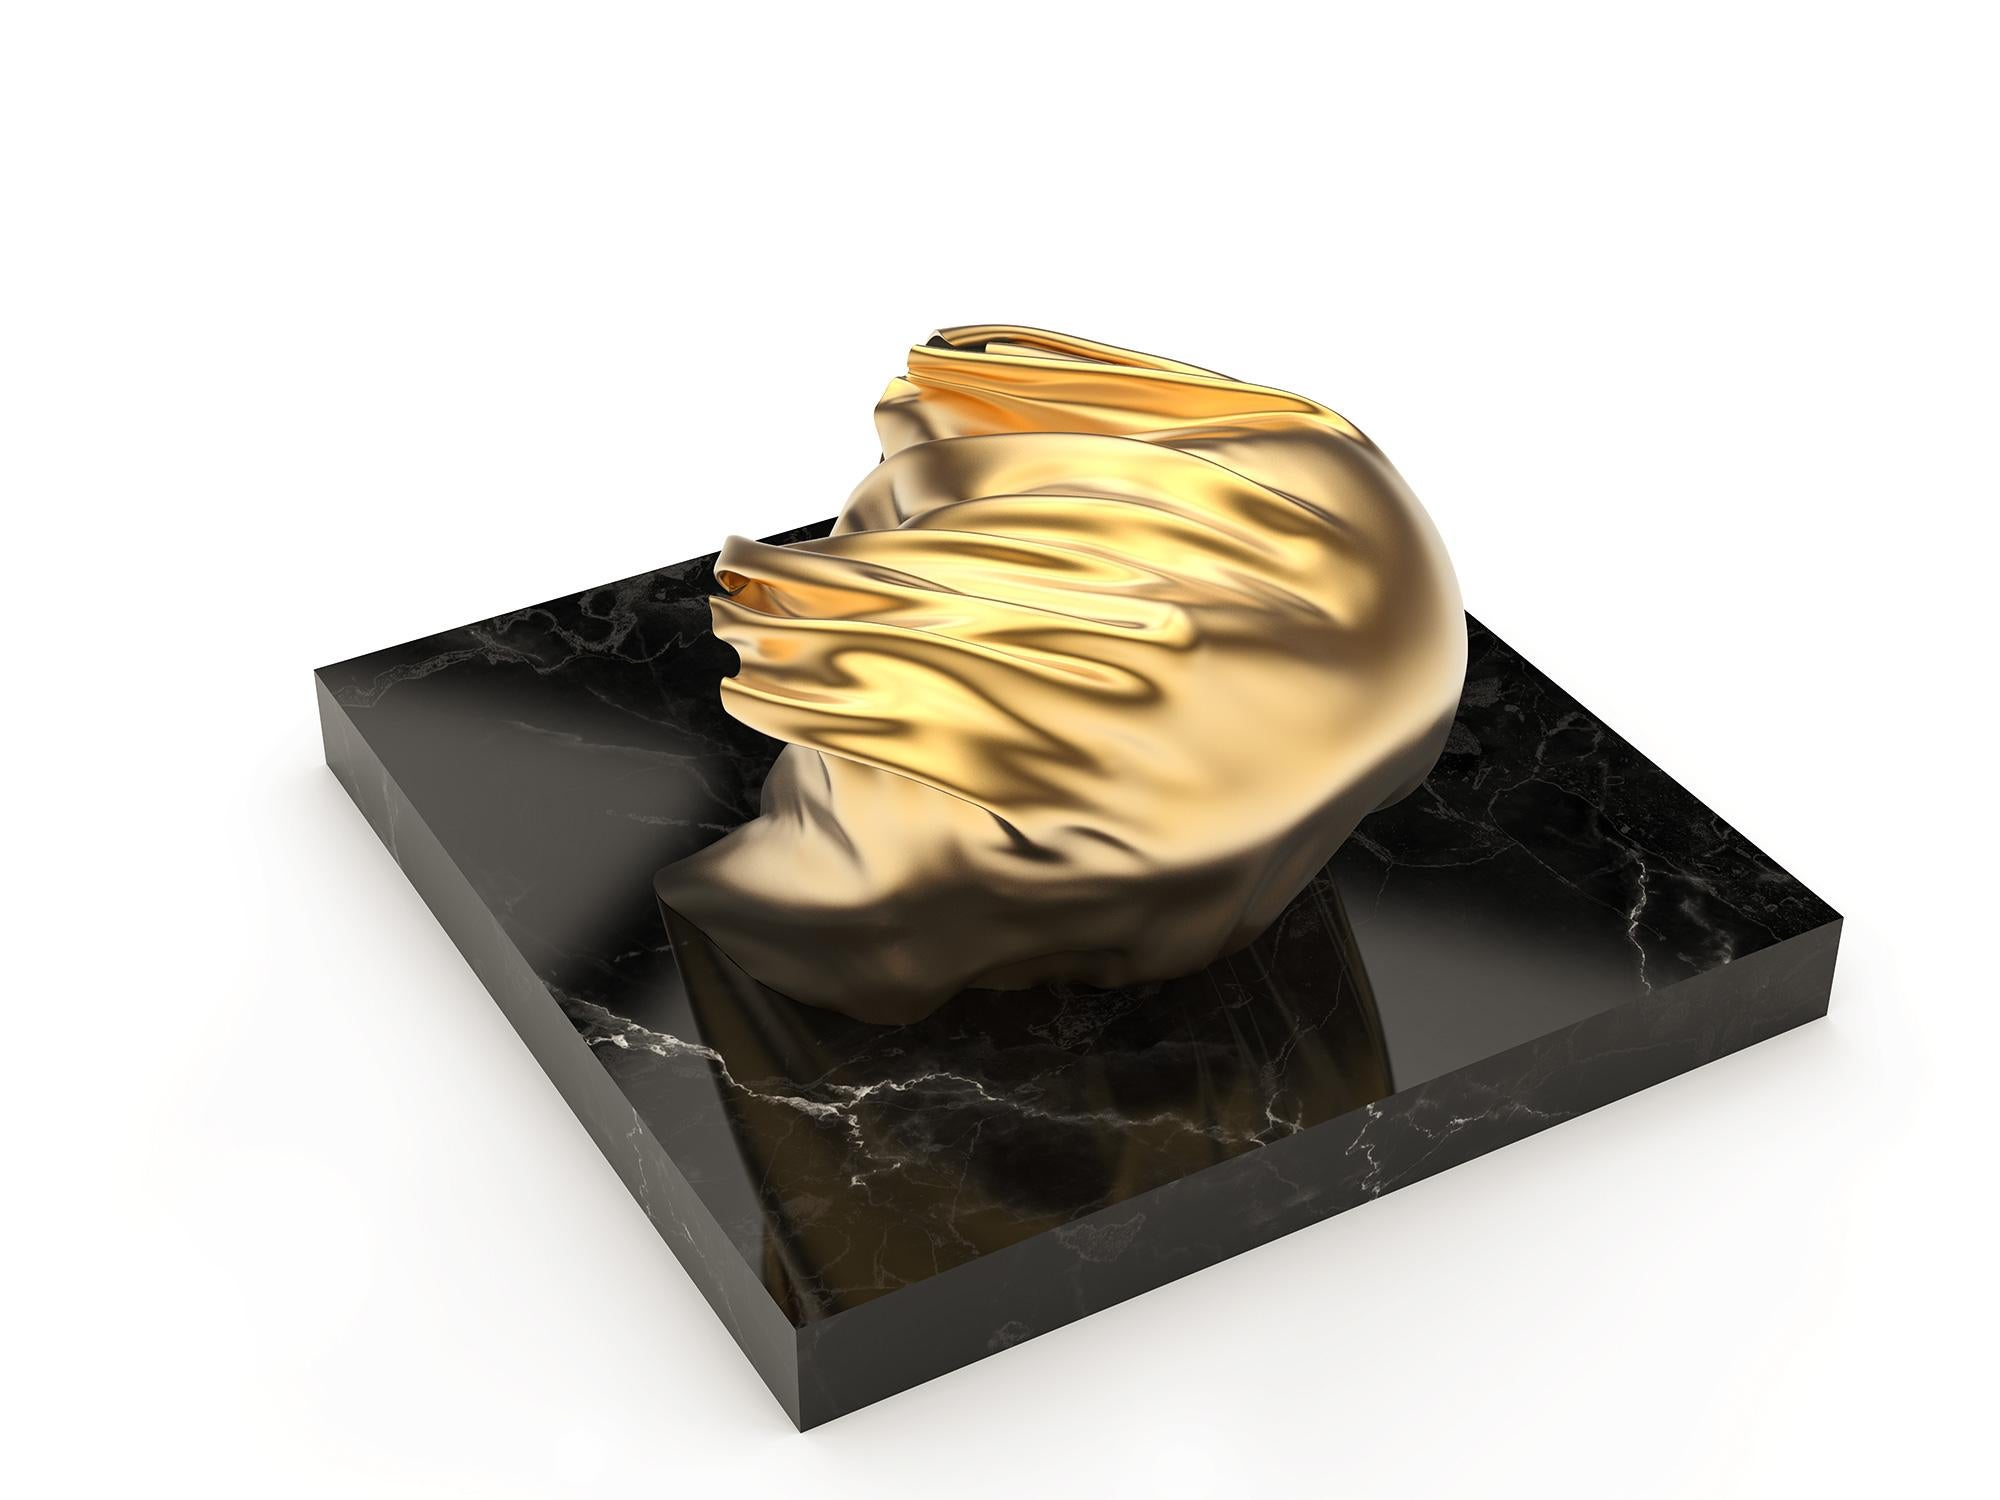 Visio Black and Golden Face Sculpture 3